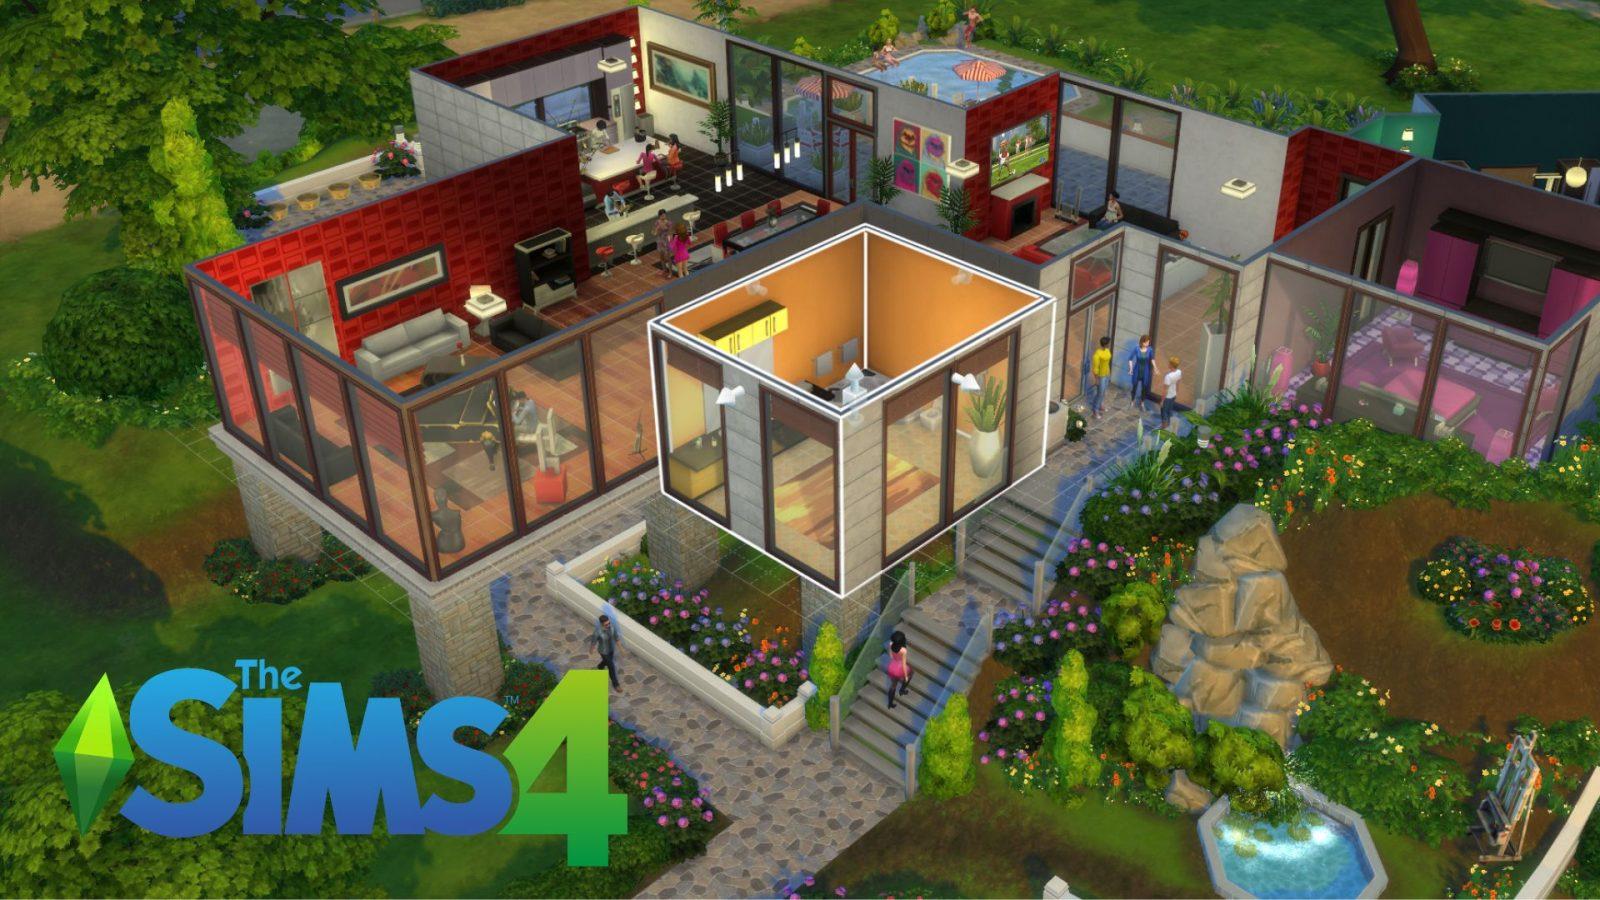 outside view of a house in the sims 4